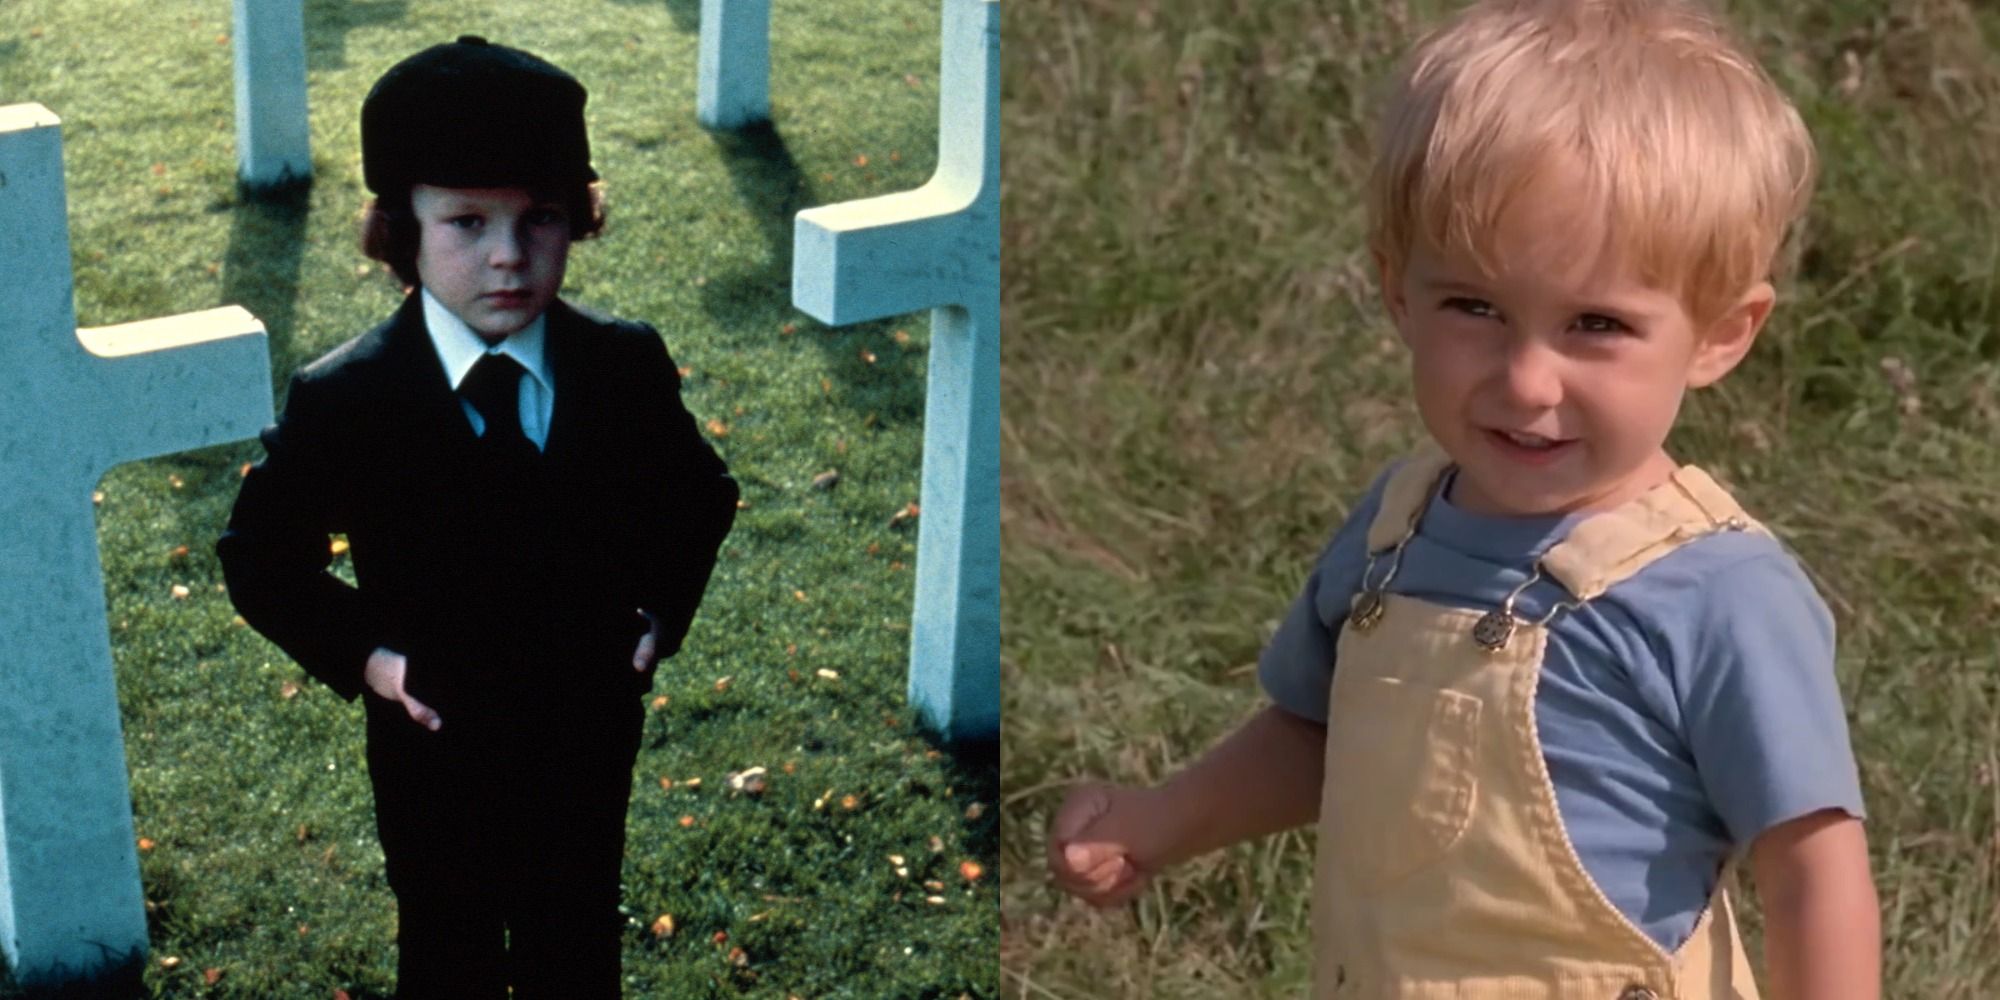 Jonathan Scott-Taylor as Damien in The Omen and Miko Hughes as Gage Creed in Pet Sematary